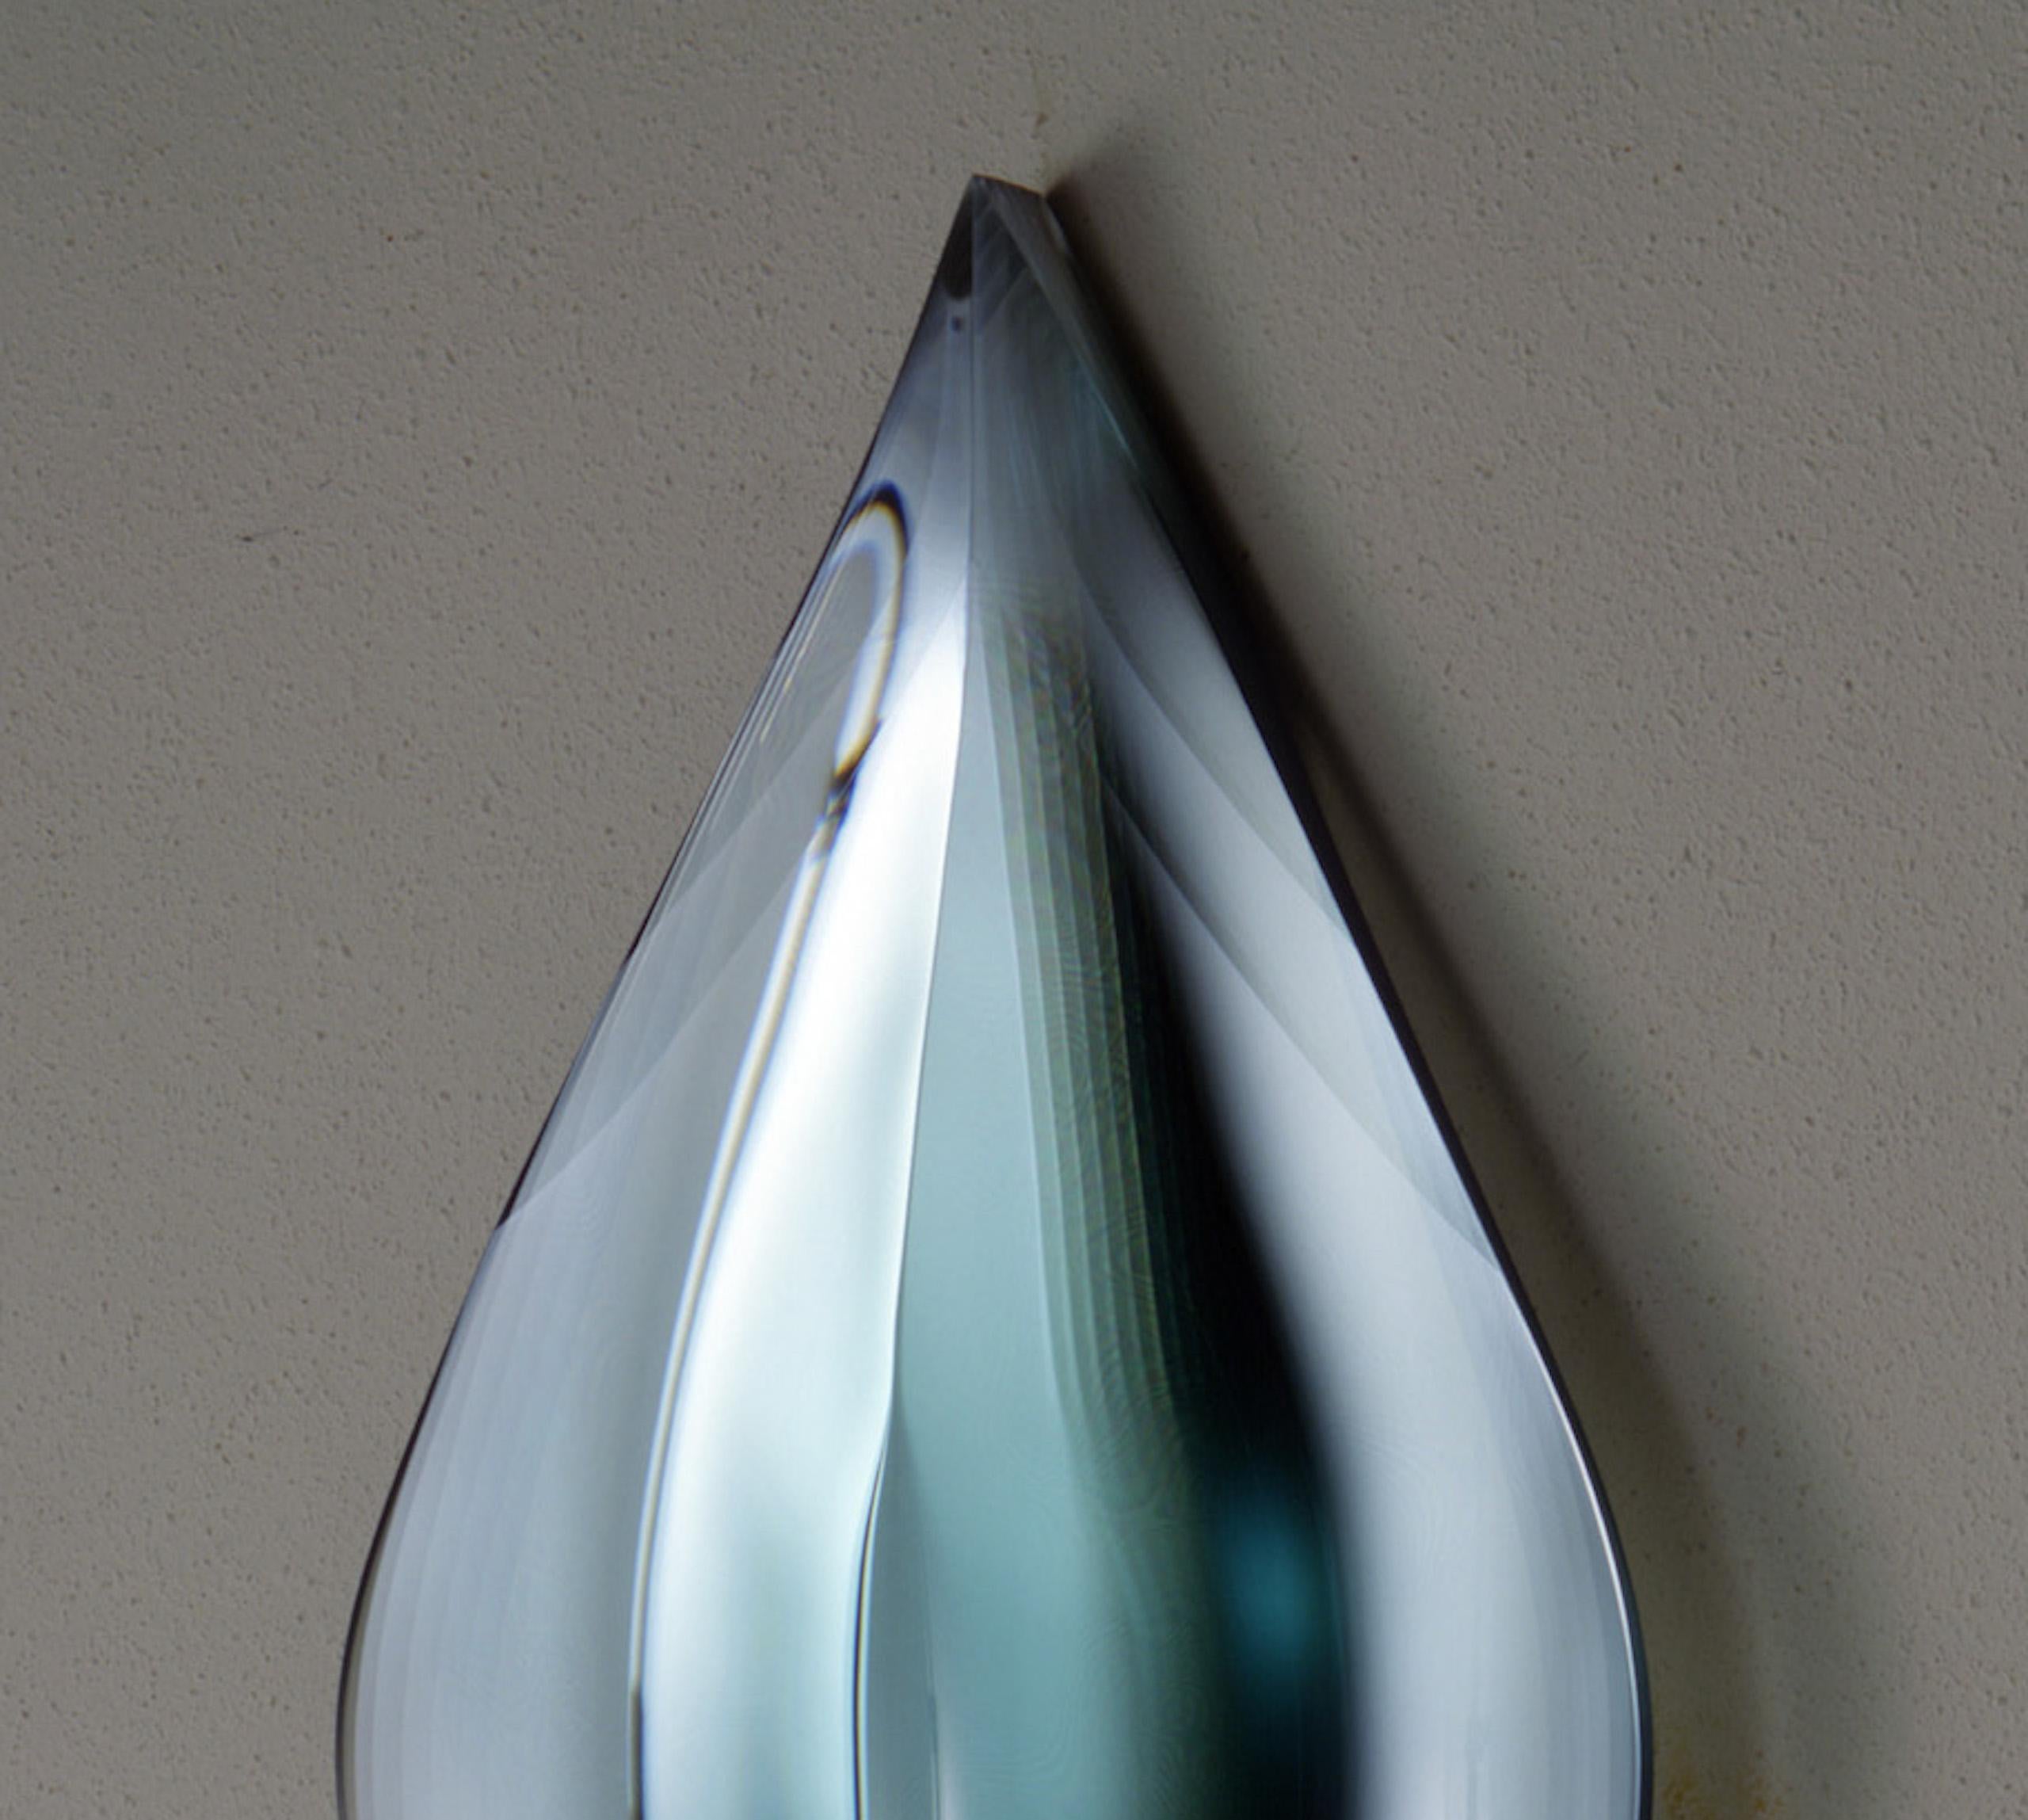 P.010502 by Toshio Iezumi - Contemporary glass sculpture, green, abstract For Sale 2